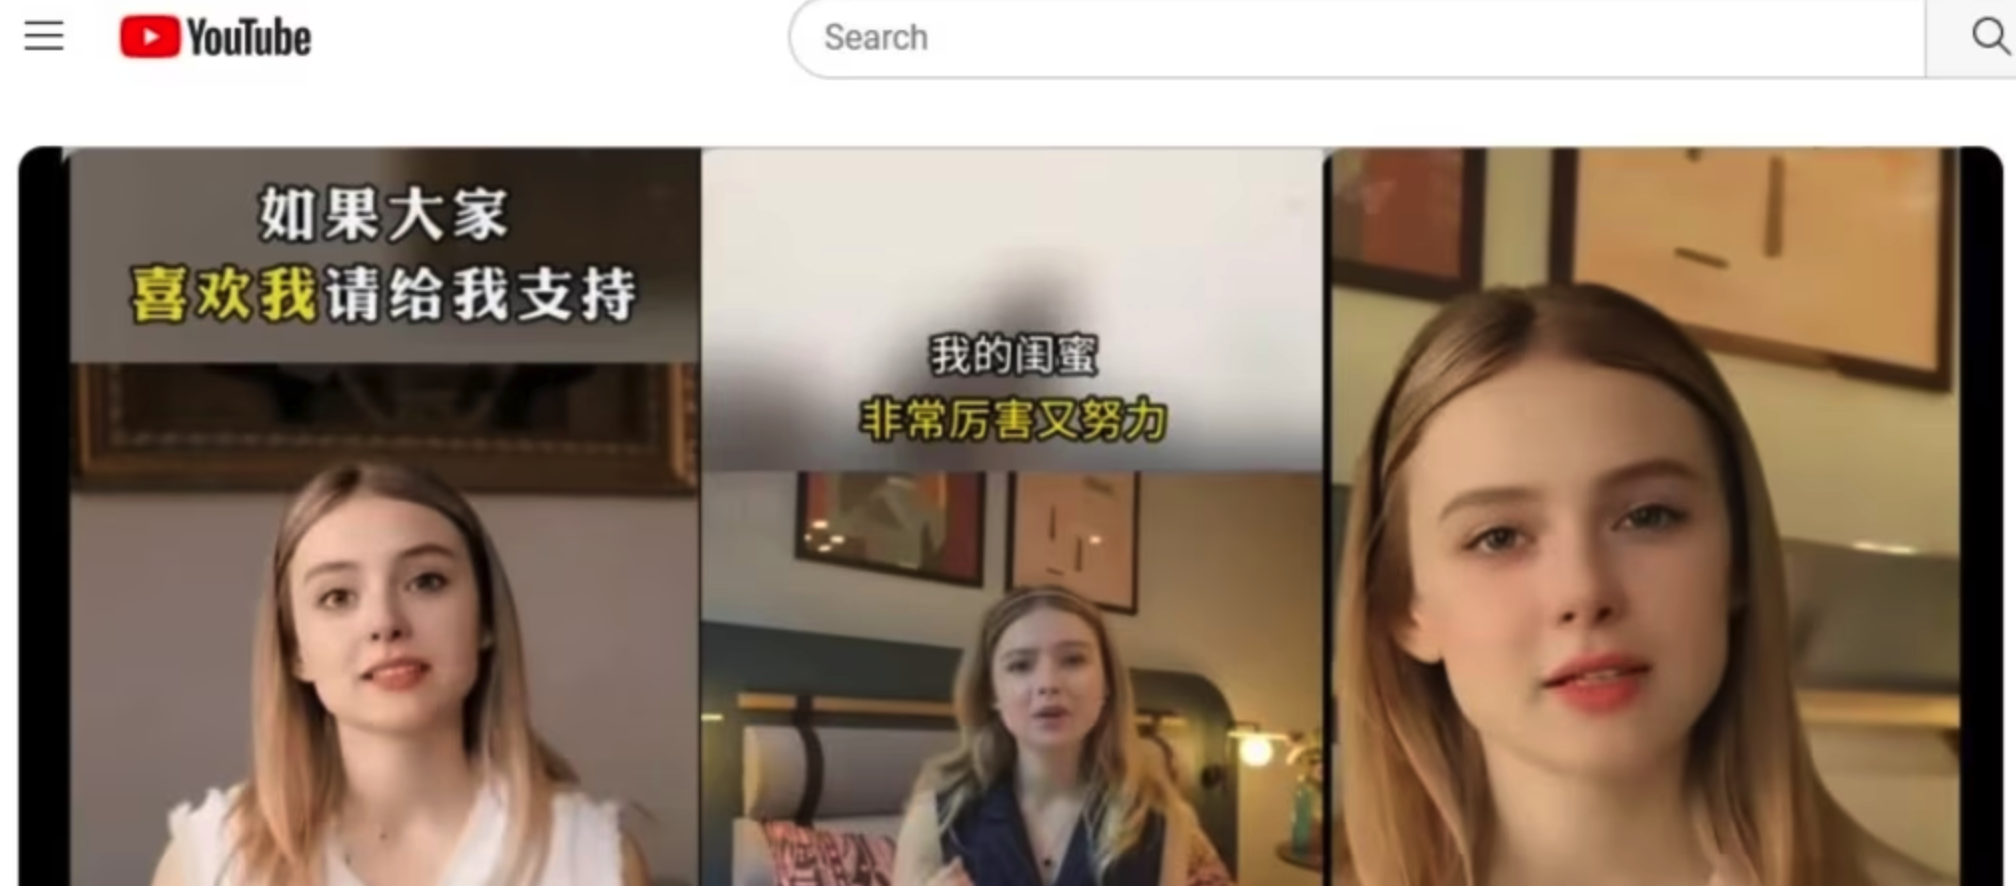 Ukrainian student’s identity cloned in China, portrayed as Russian